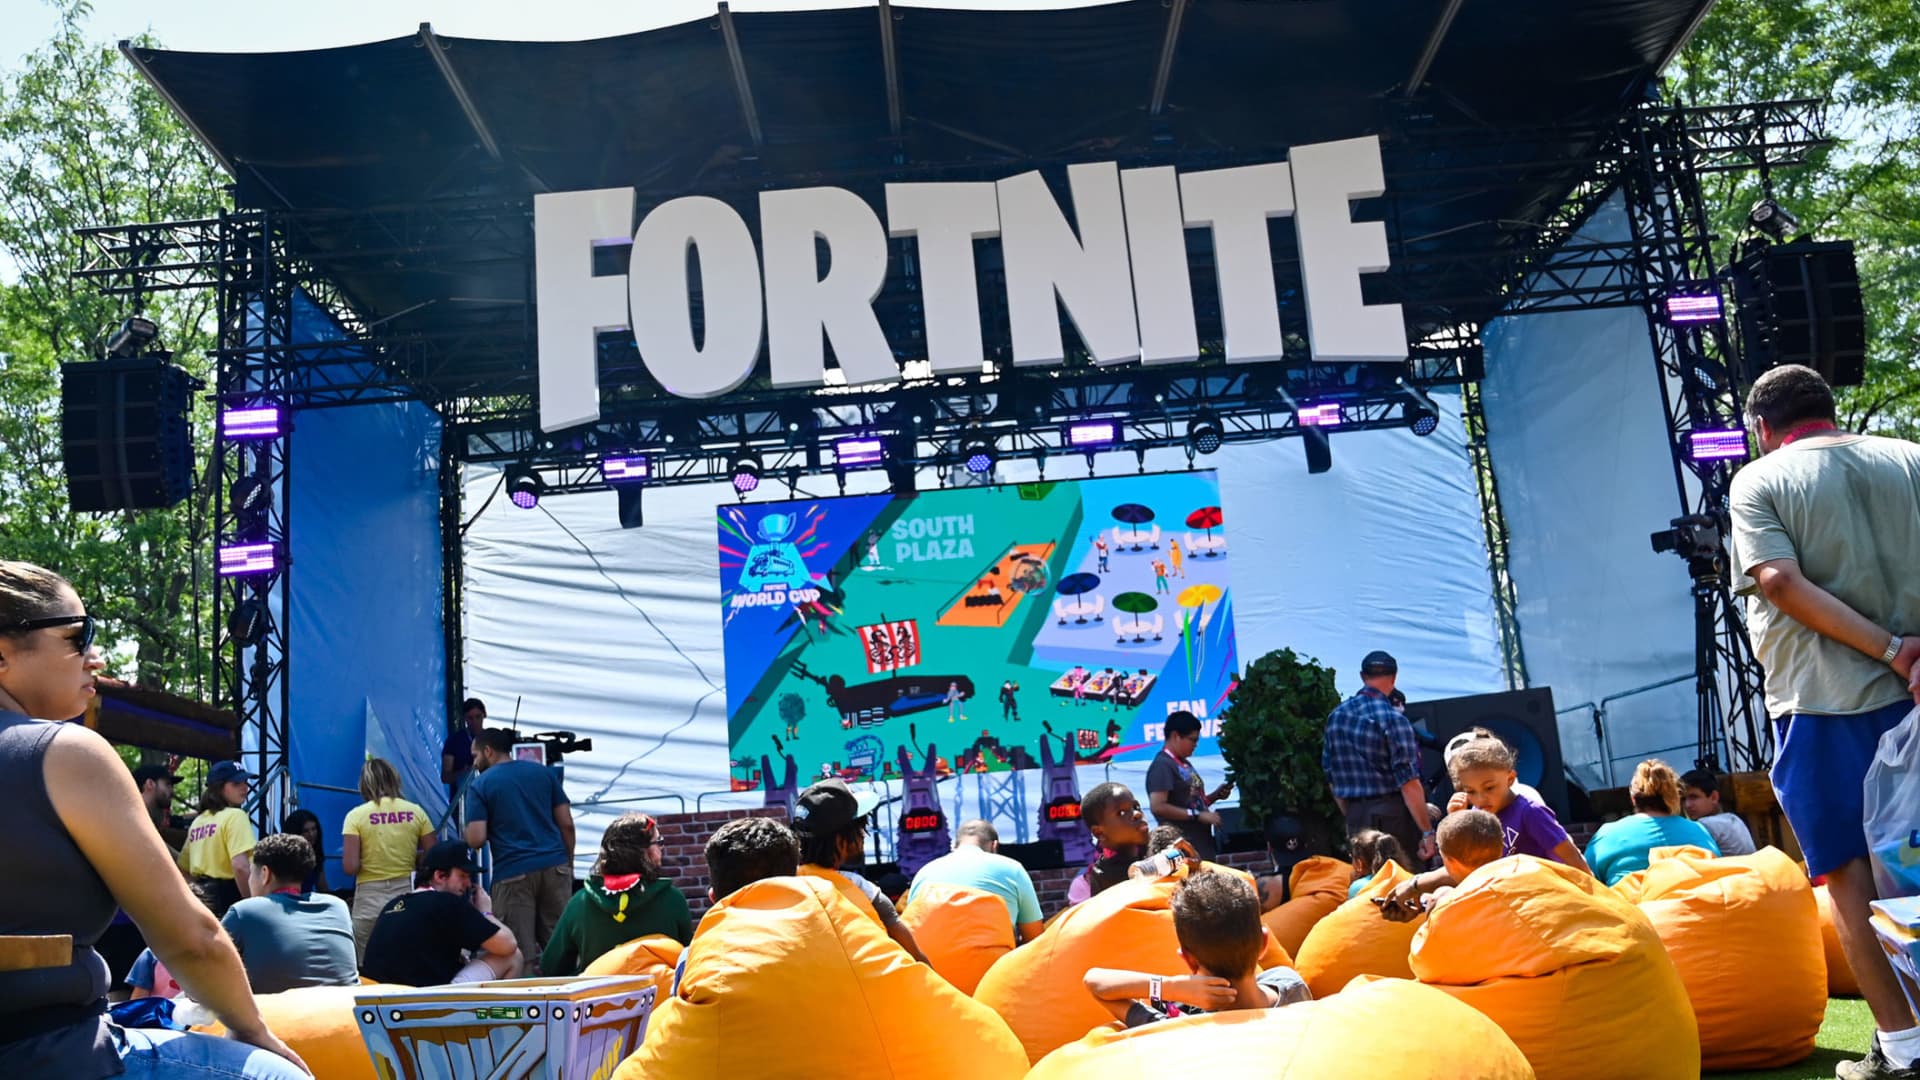 Fortnite maker Epic Games to pay $520 million in fines in FTC settlement